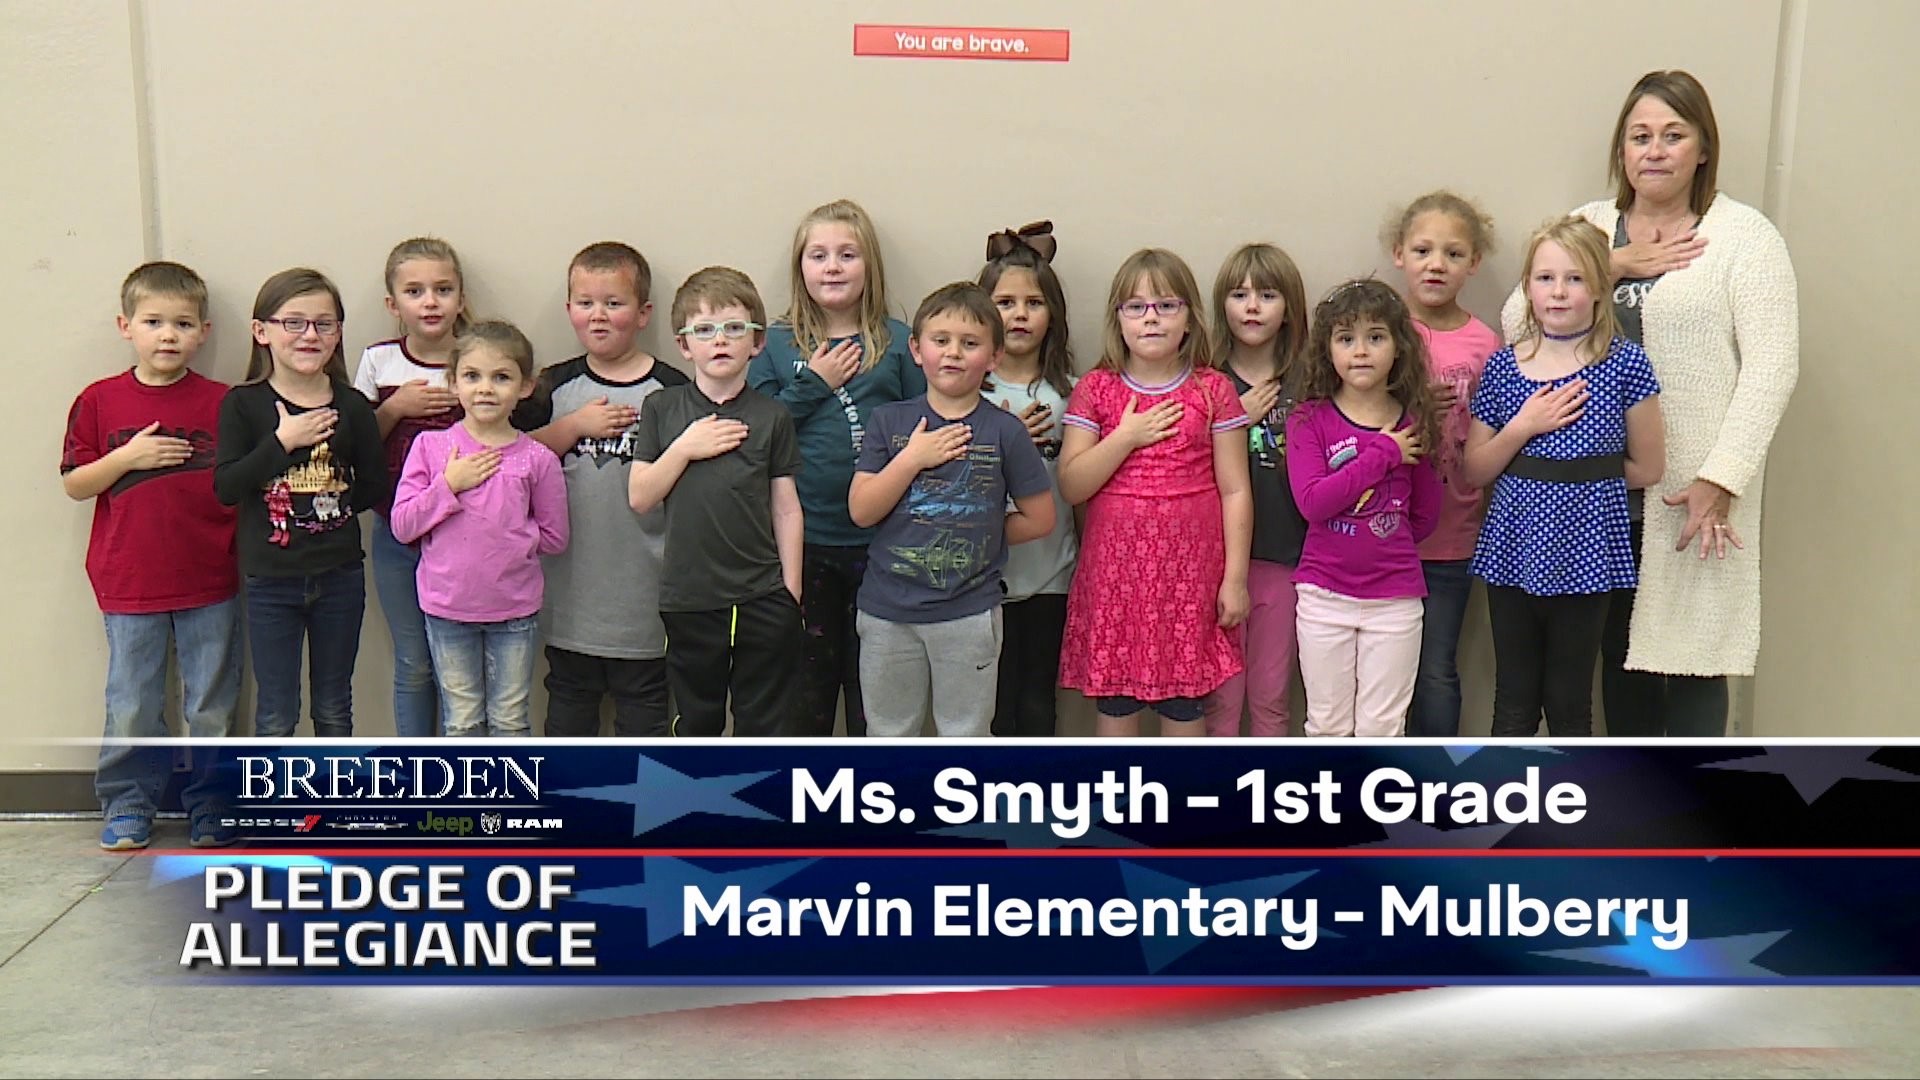 Ms. Smith 1st Grade Marvin Elementary, Mulberry